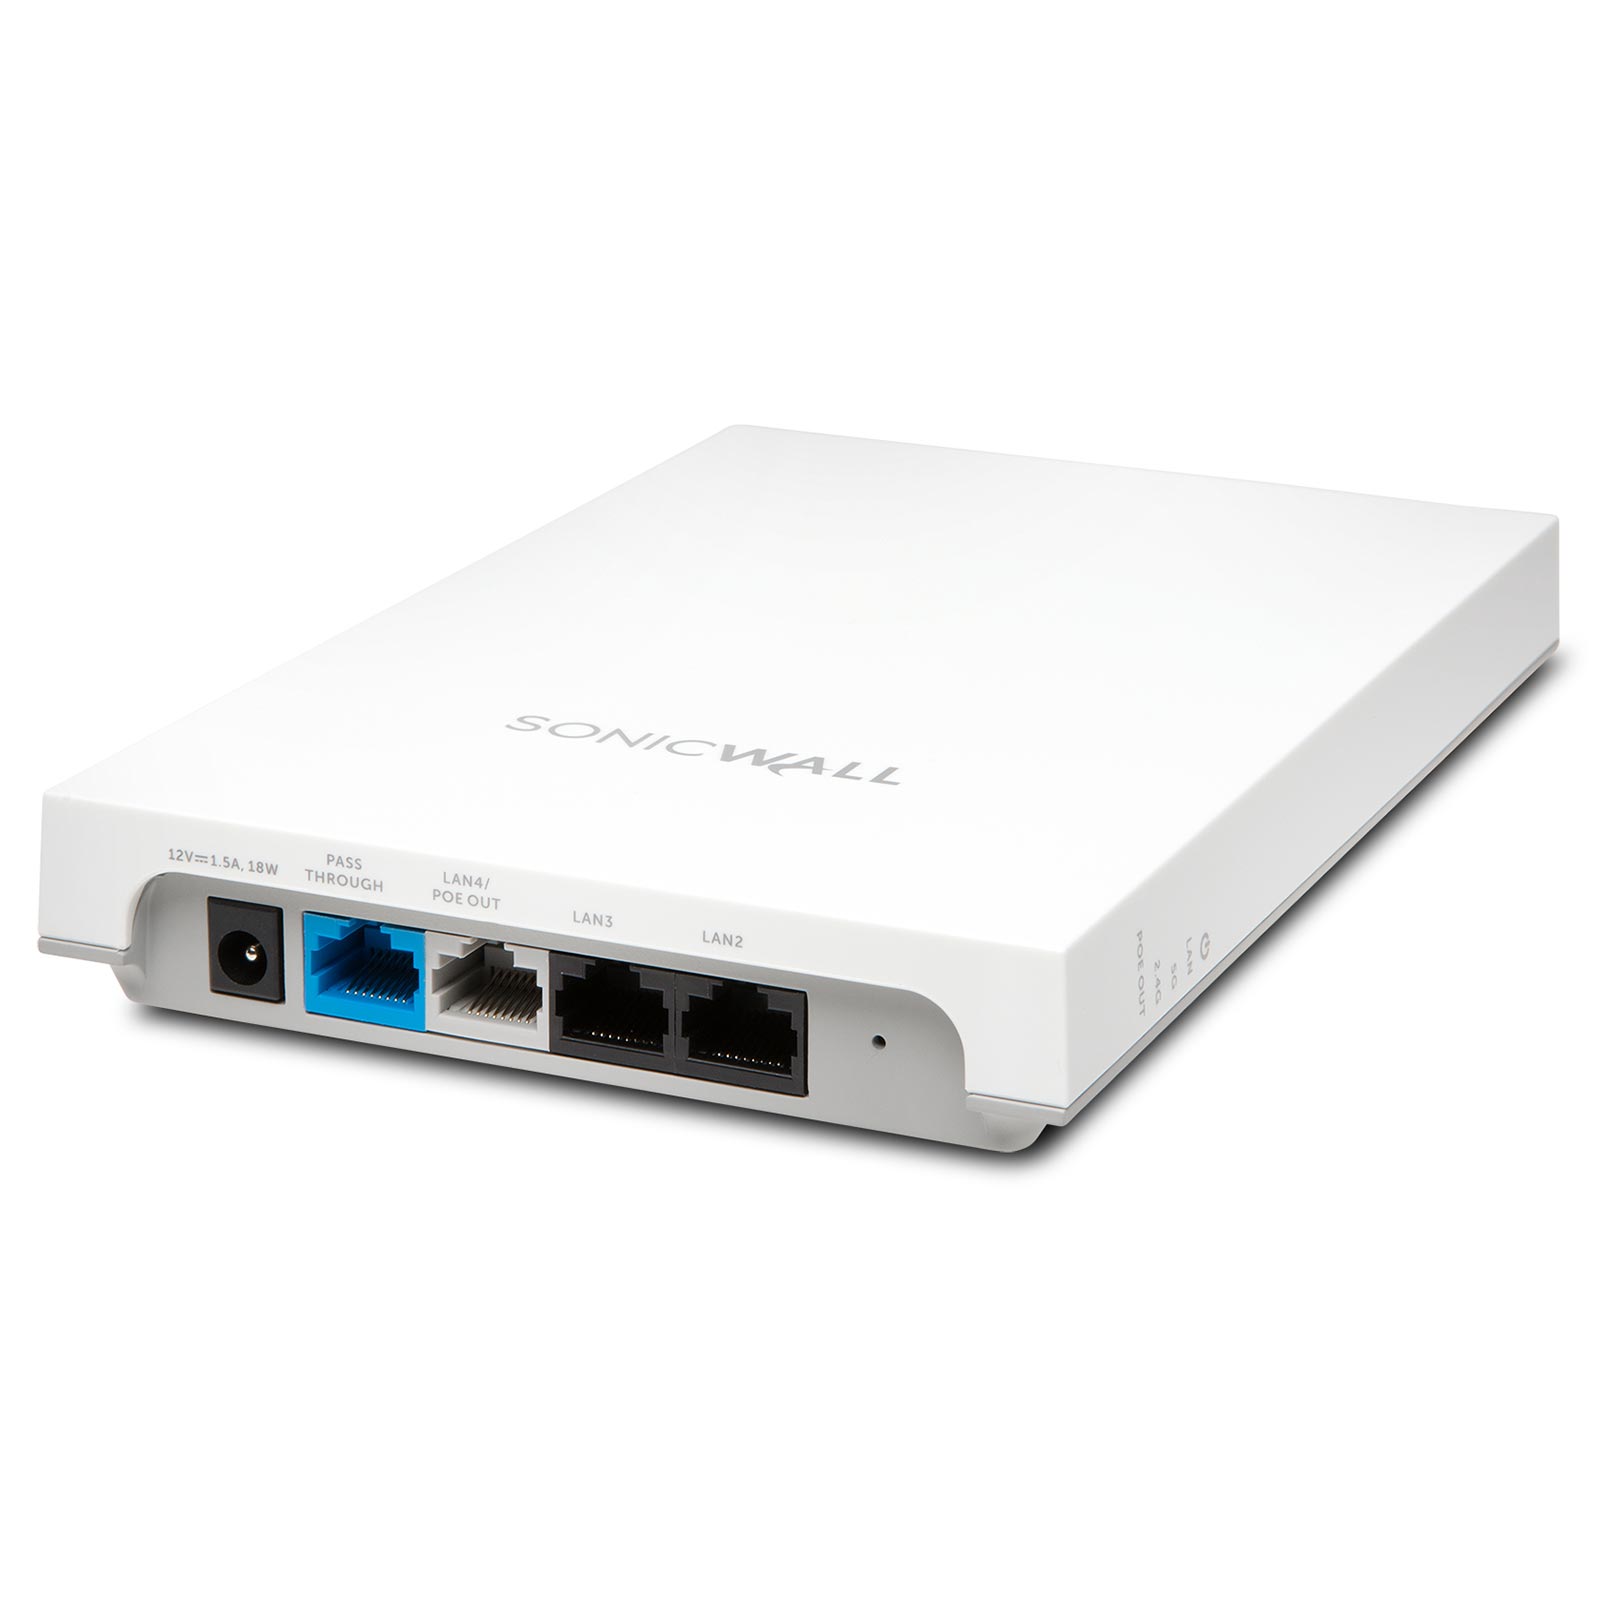 SonicWave 224W WLAN Access Point mit Secure Upgrade Plus mit Secure Cloud &  24x7 Support, ohne PoE-Injektor, 4er-Pack, 3 Jahre  (Trade-In/Trade-Up-Sonderkonditionen) (02-SSC-2495)